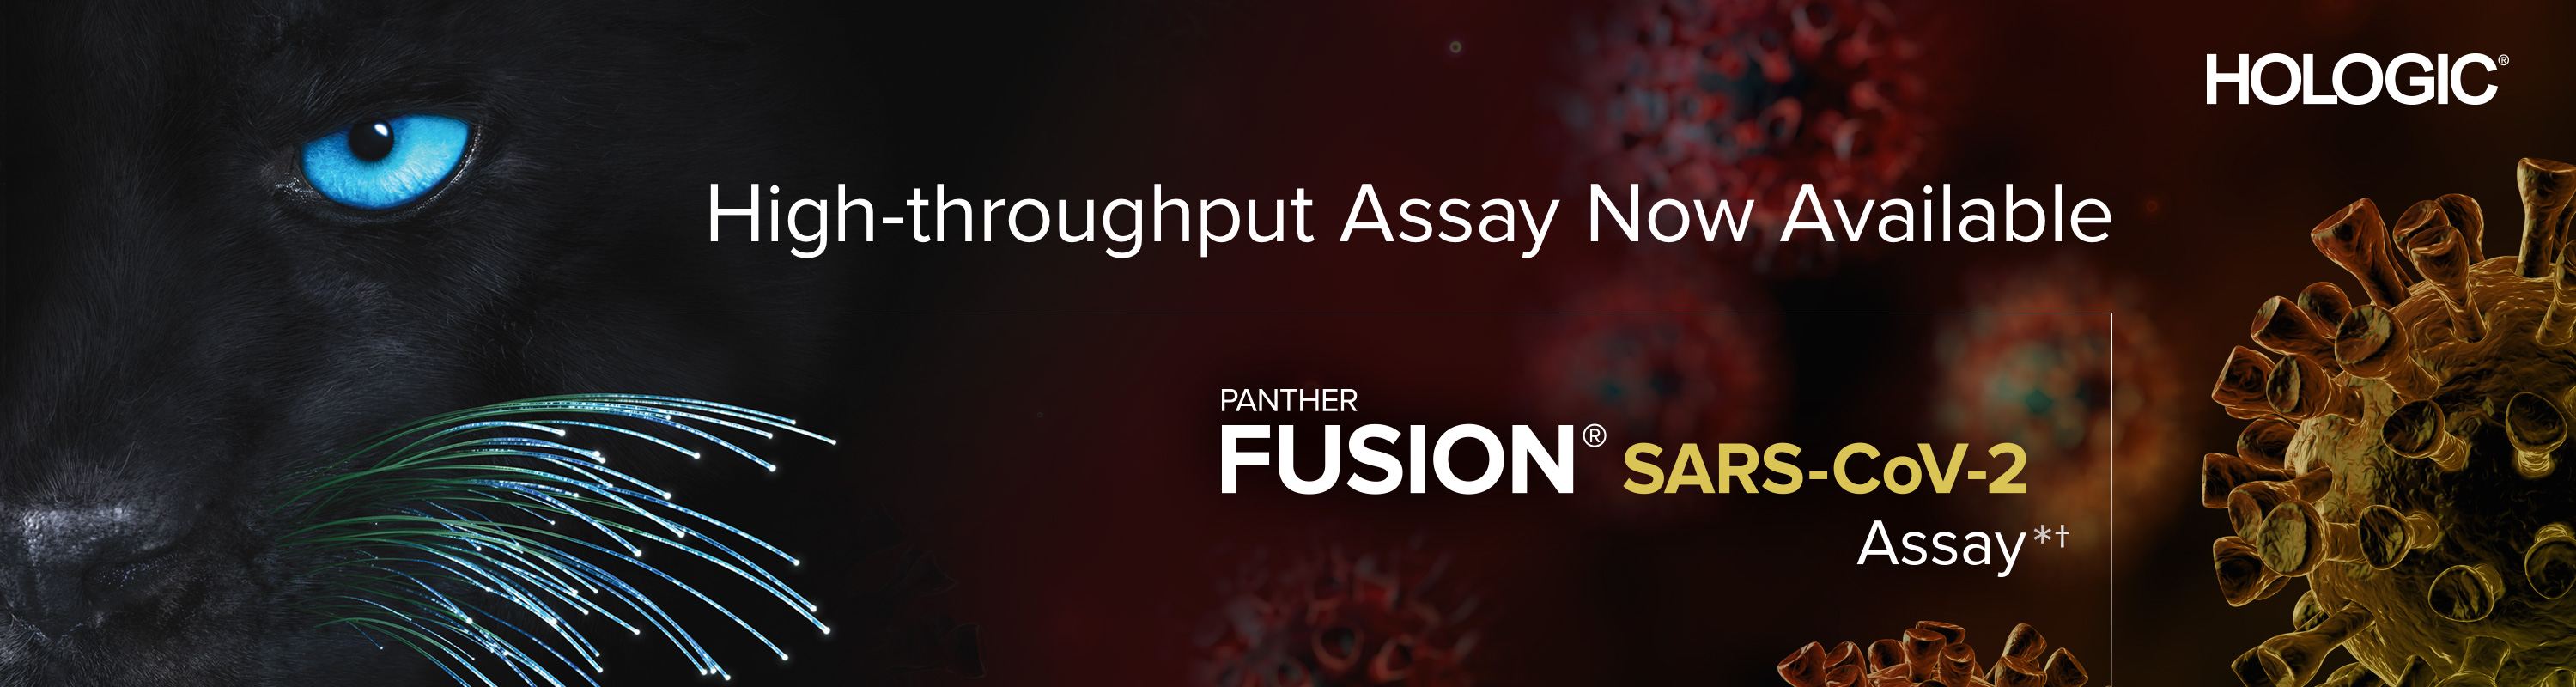 New SARS-CoV-2 assay available for Hologic Panther Fusion 